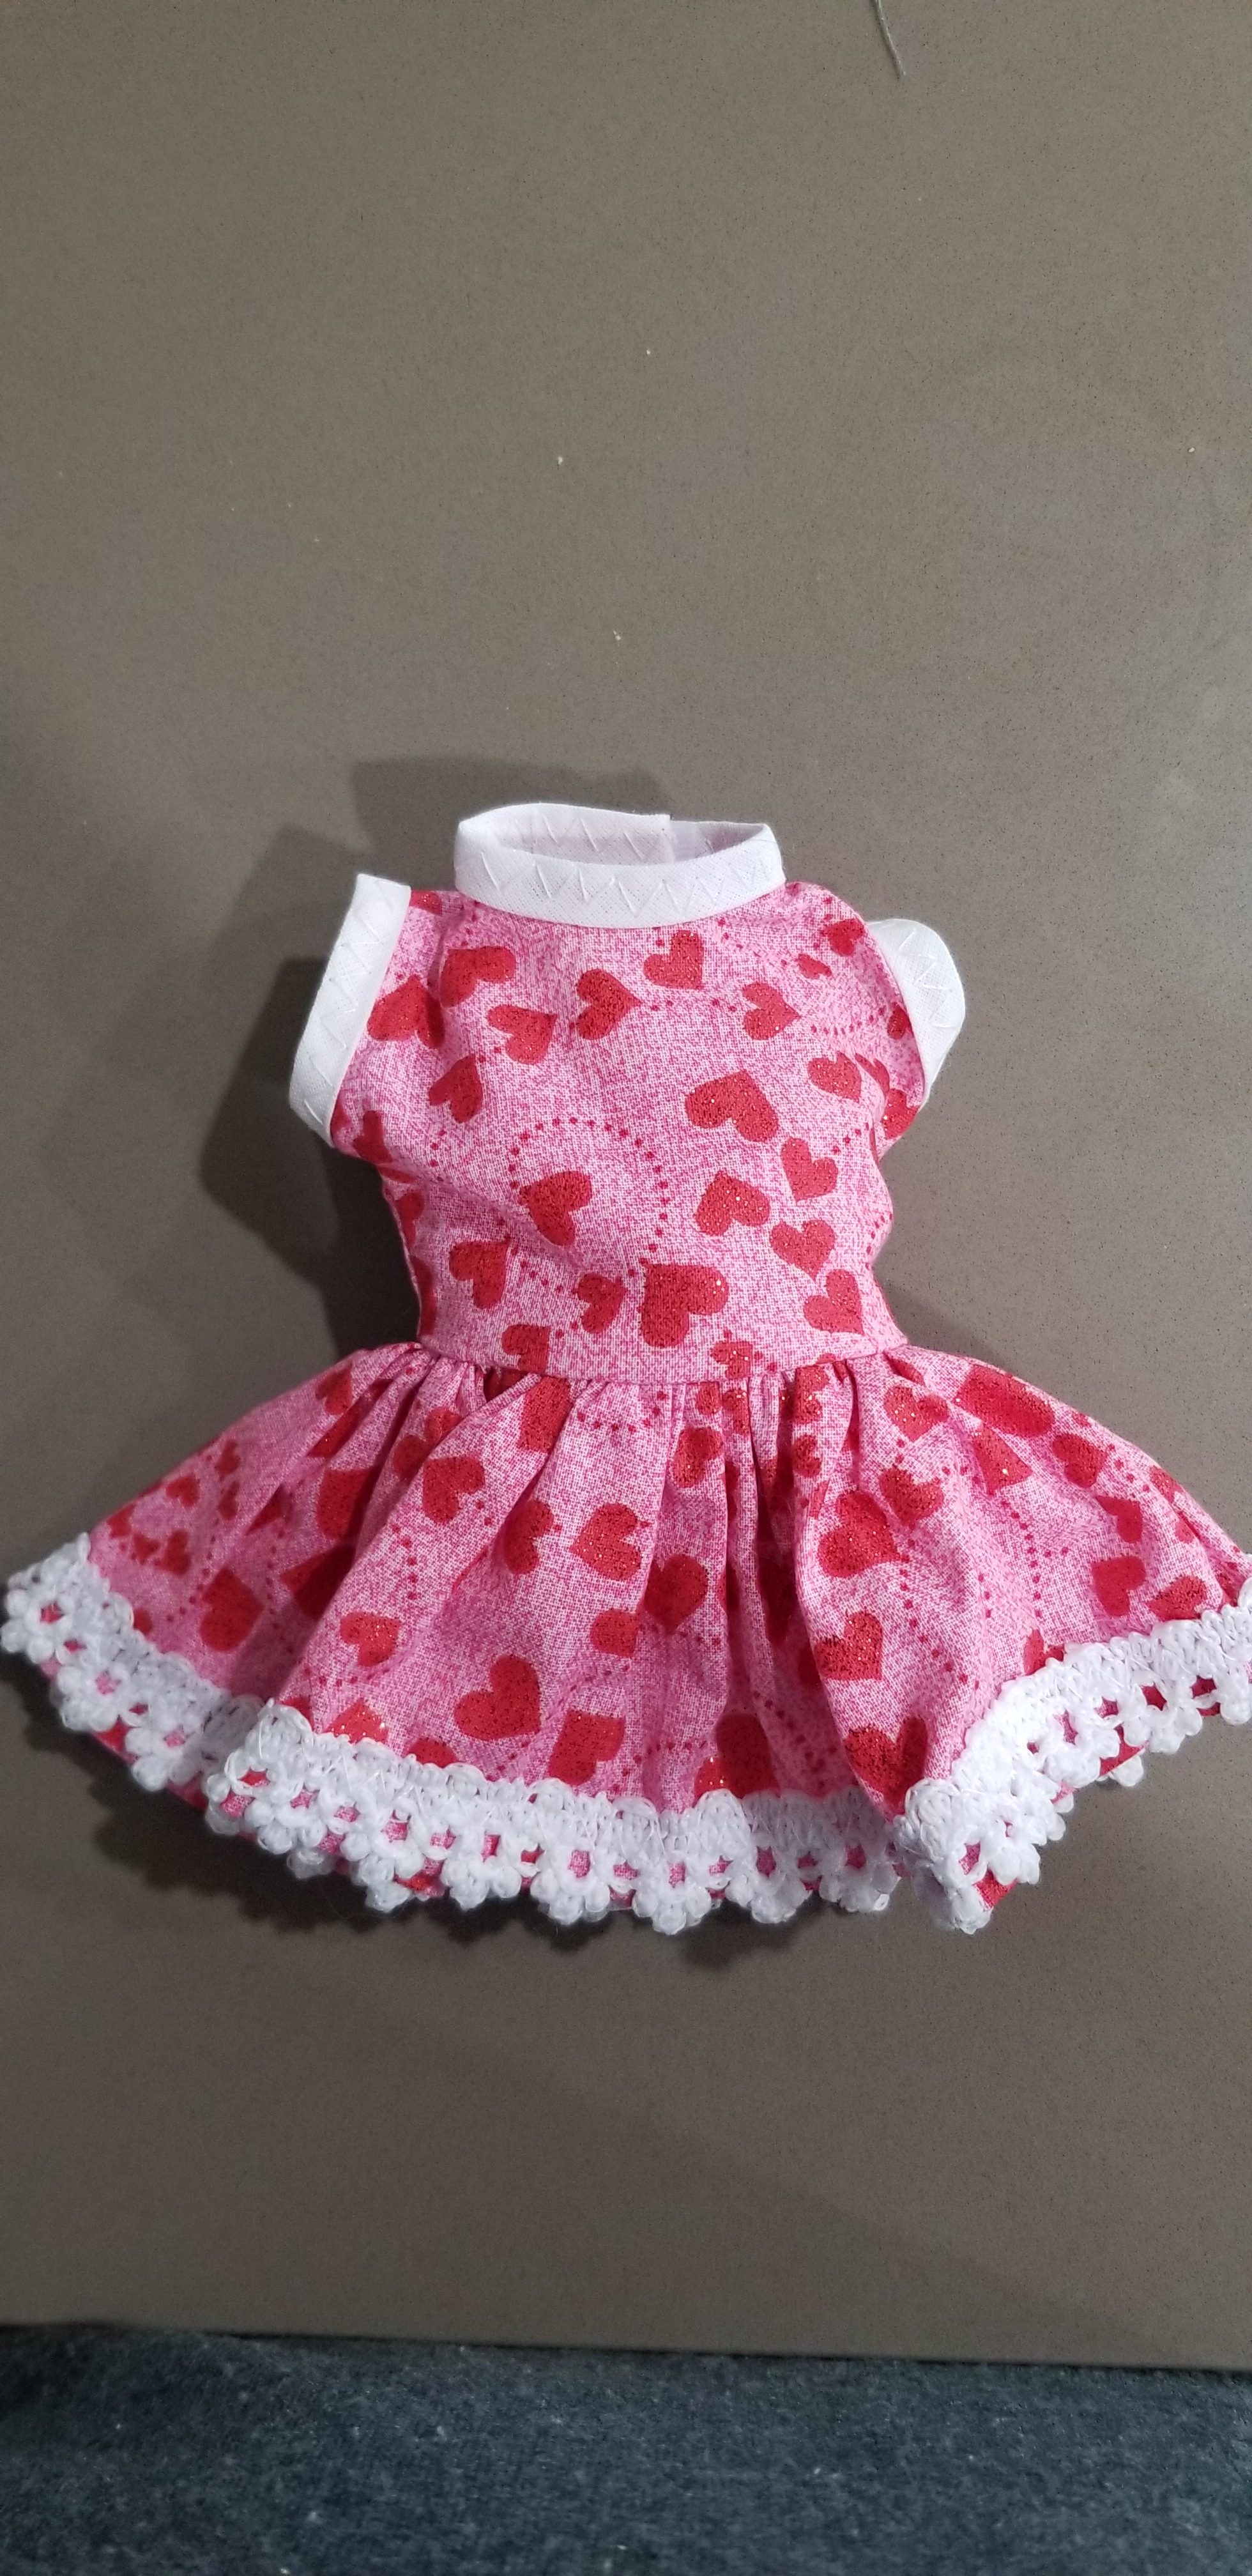 red heart dress - PRIMATE SUPPLY